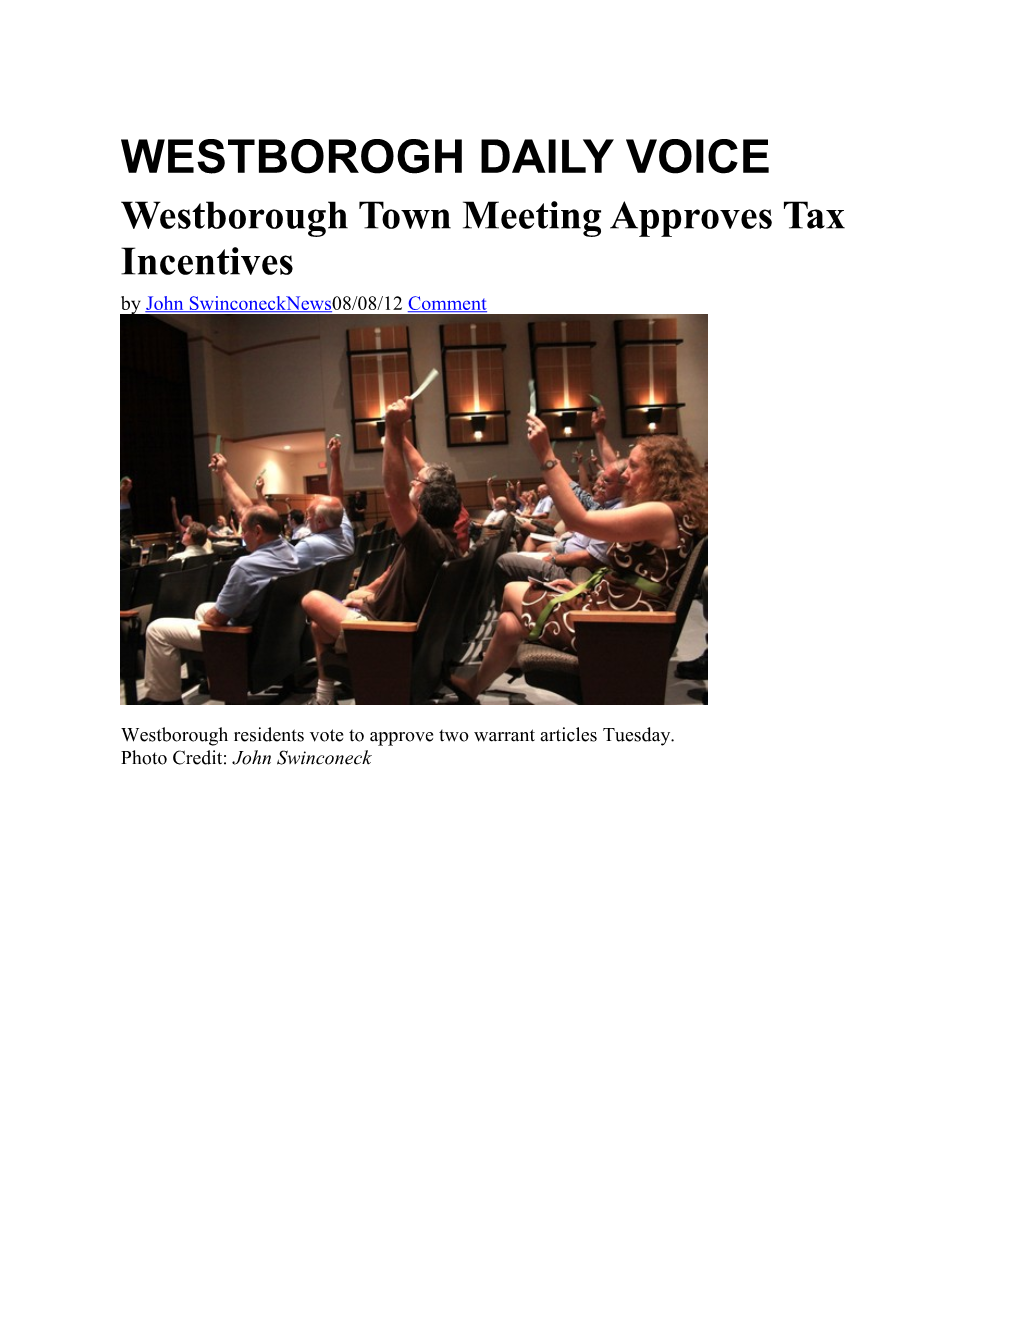 Westborough Town Meeting Approves Tax Incentives